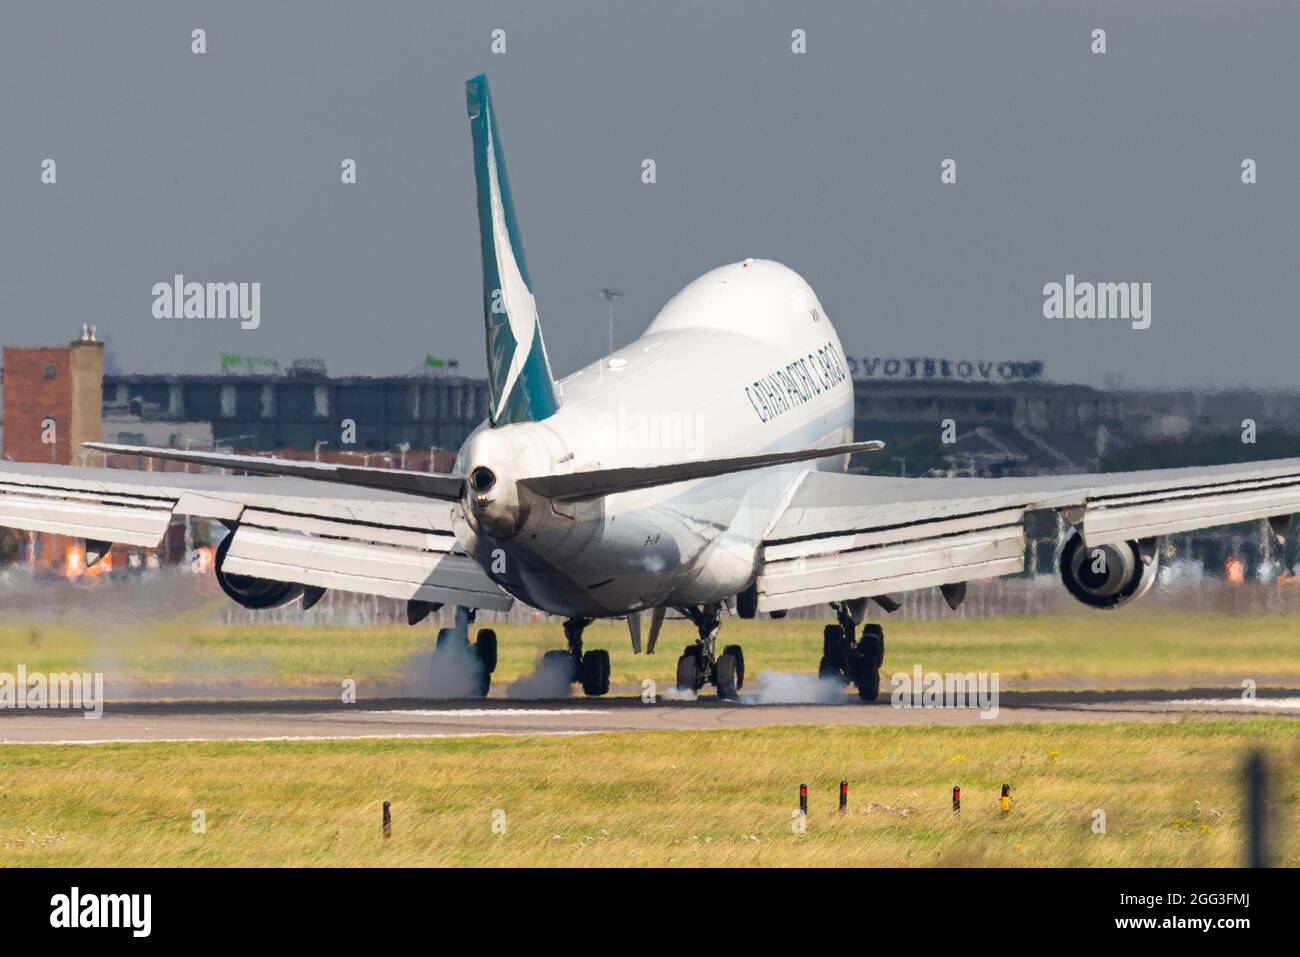 Cathay Pacific Cargo Boeing 747 freighter Jumbo Jet airliner jet plane landing at London Heathrow Airport, UK, touching down with tyre smoke Stock Photo